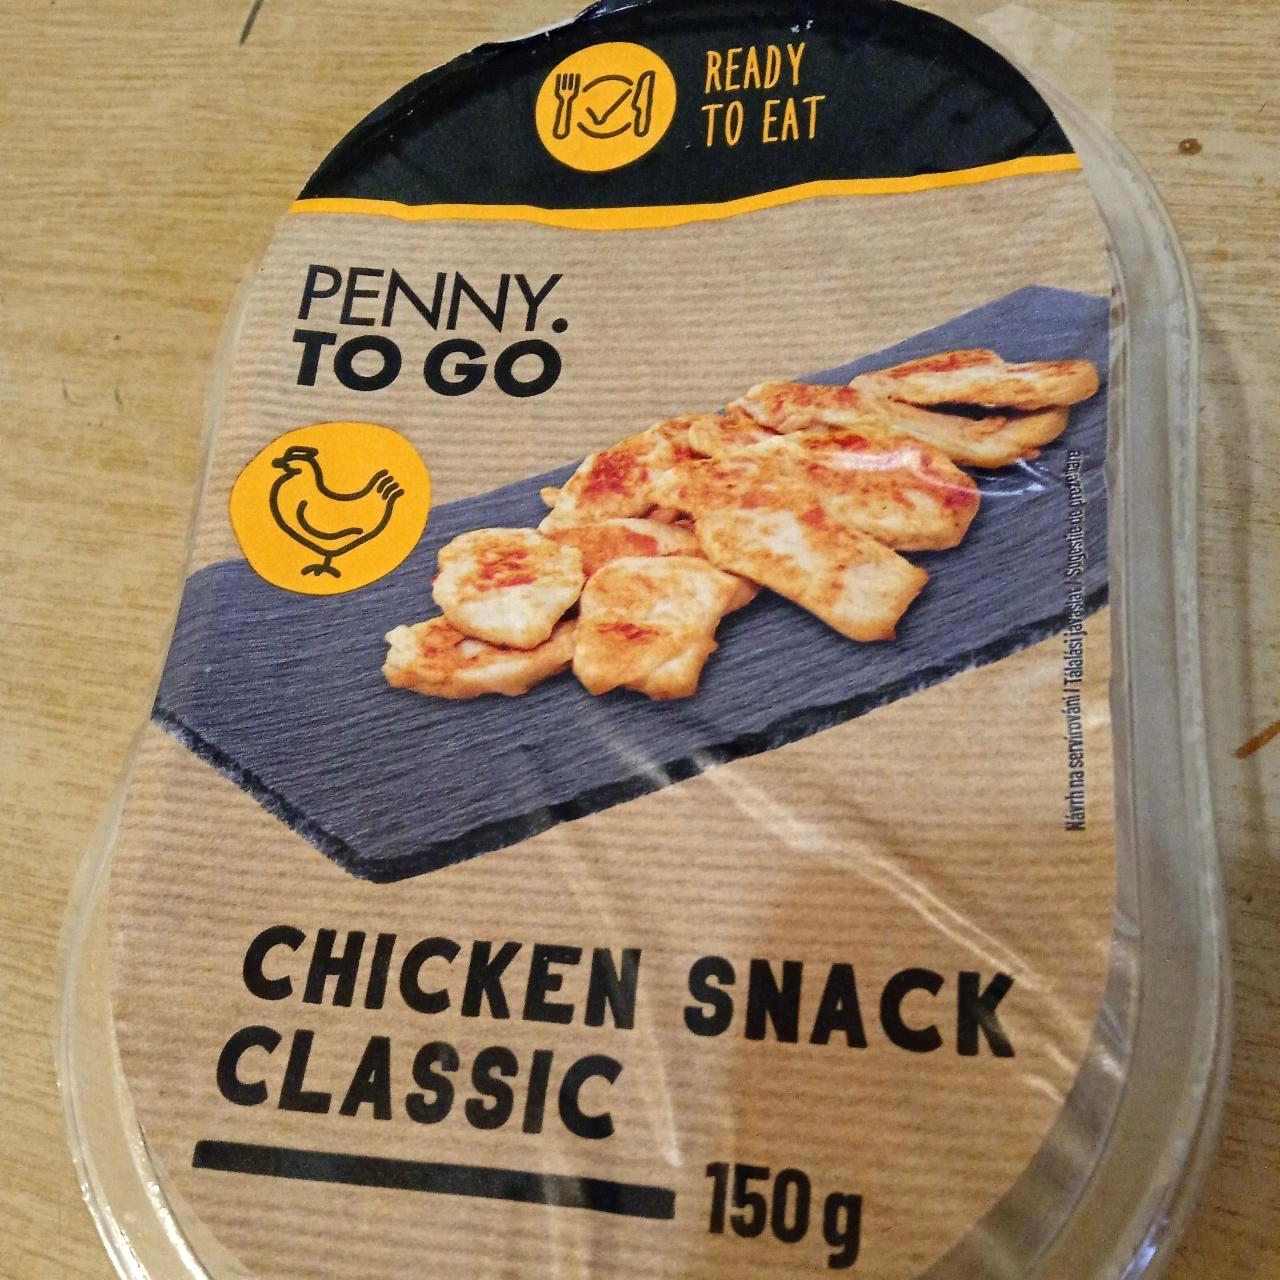 Képek - Chicken snack classic Penny to go